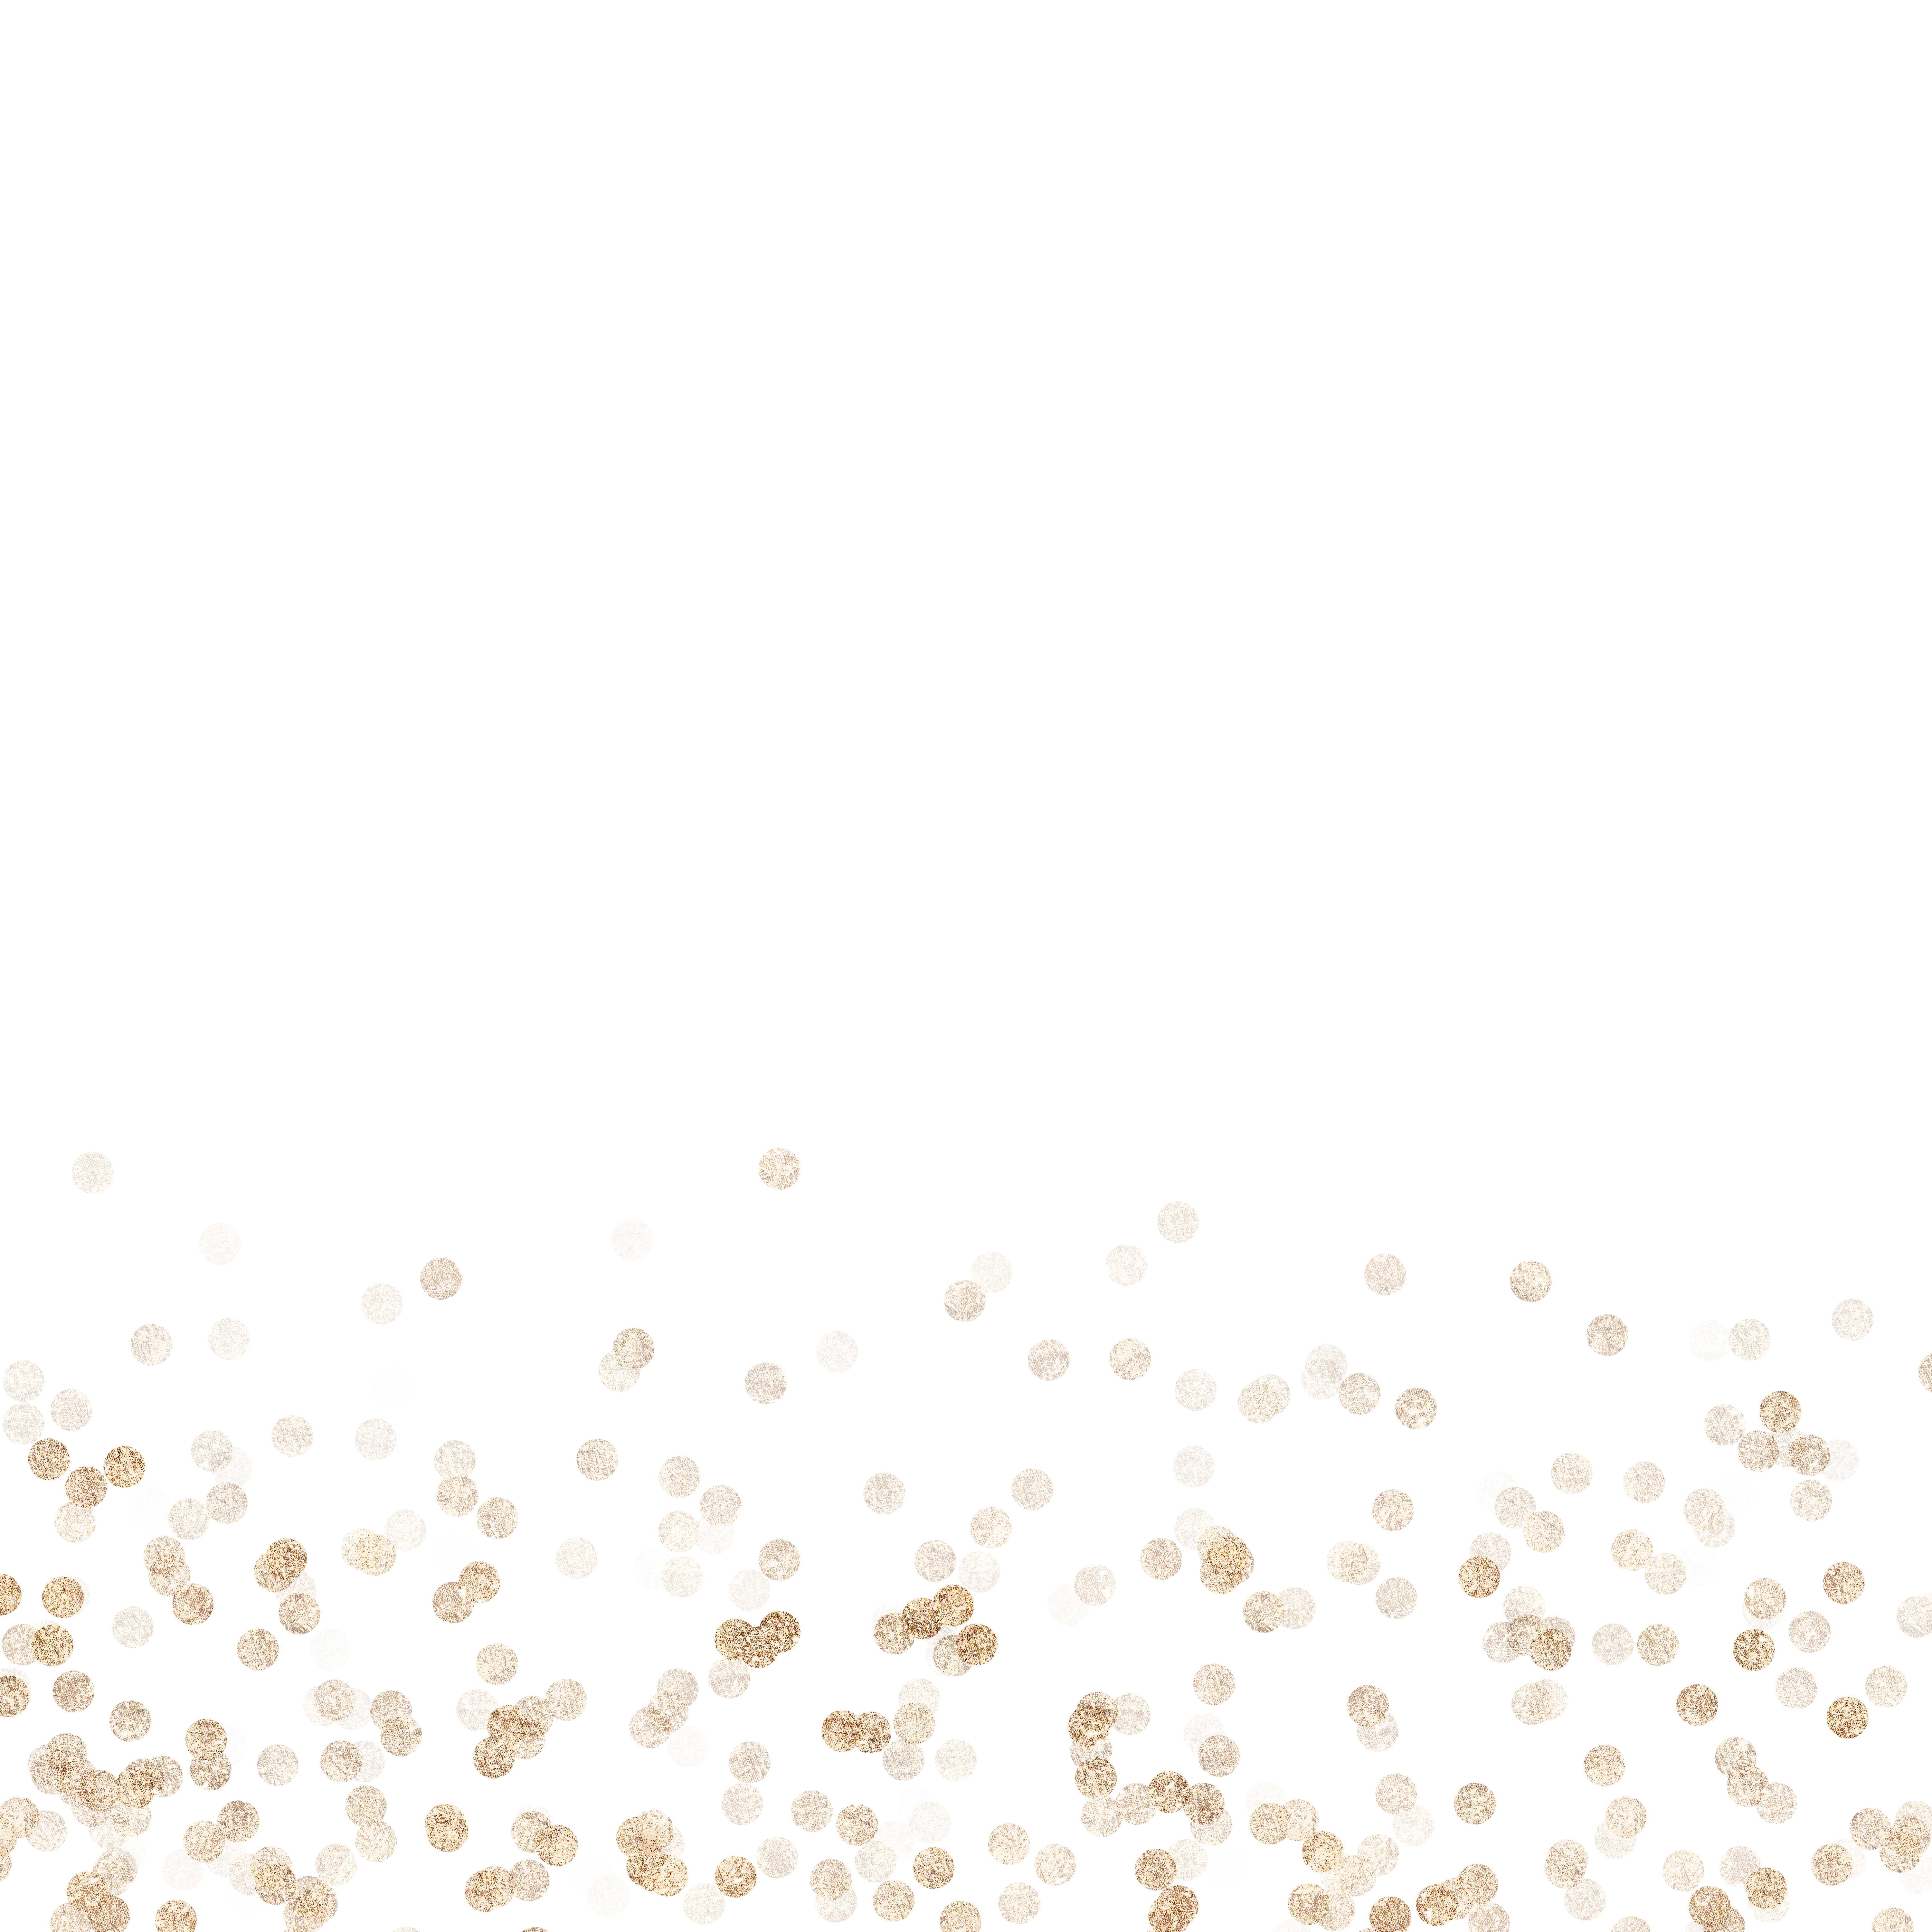 Confetti Glitter Posh Gold Cardmaking Download HQ PNG PNG Image